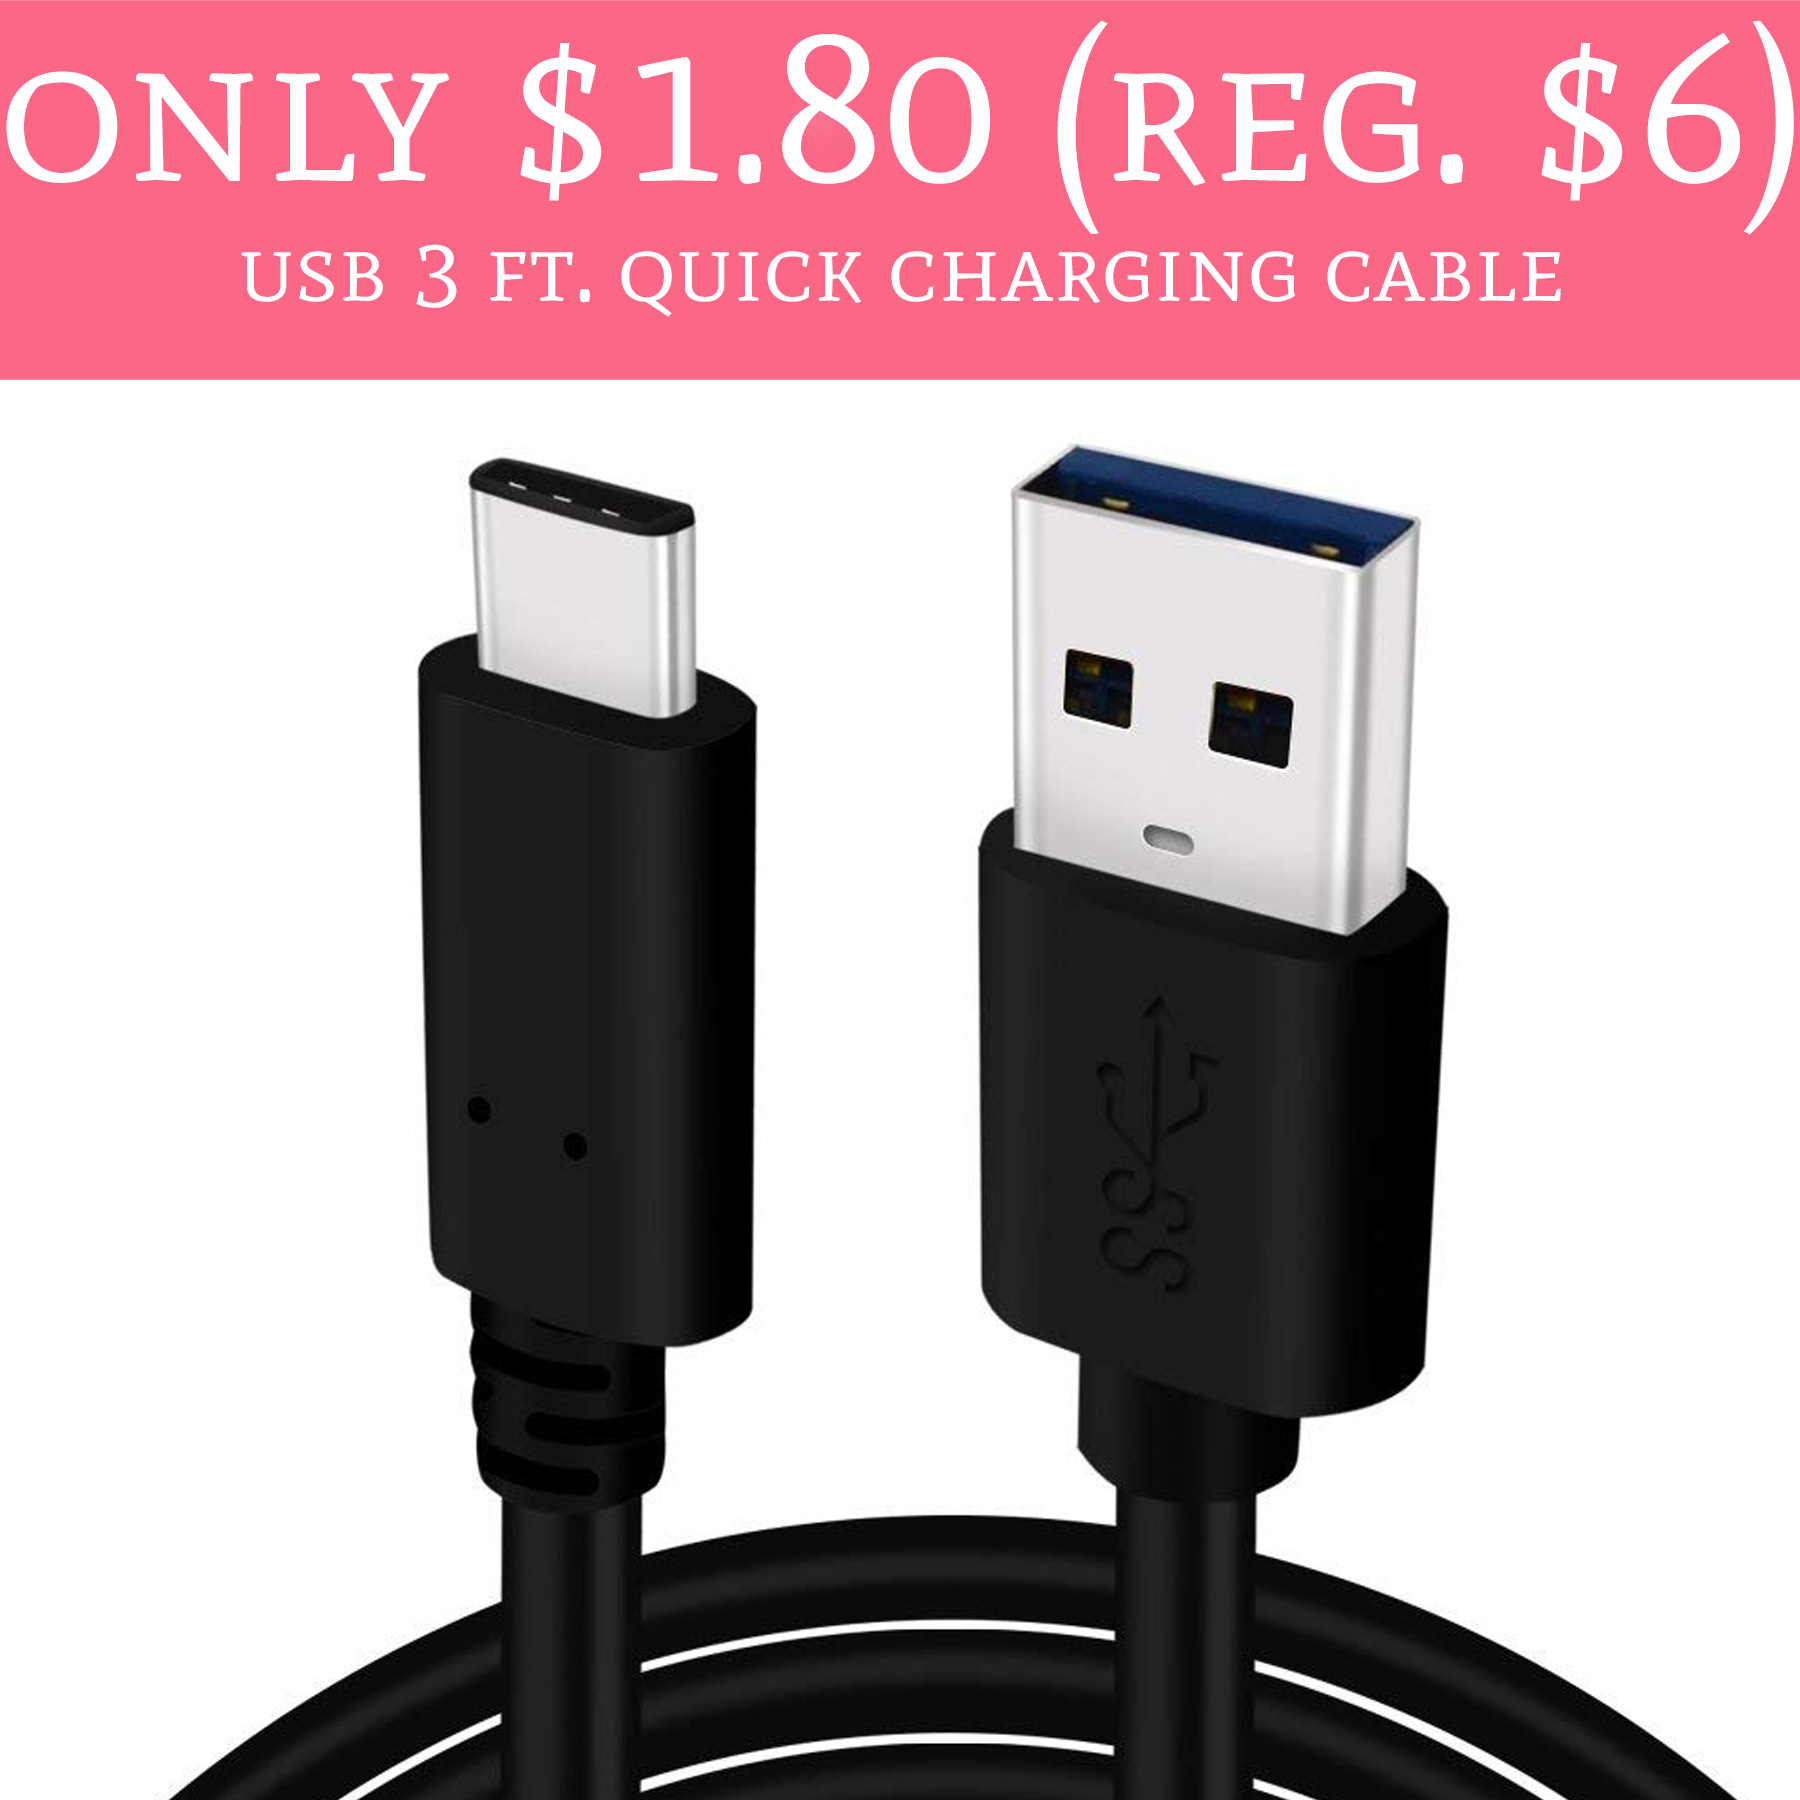 usb-3ft.-quick-charging-cable